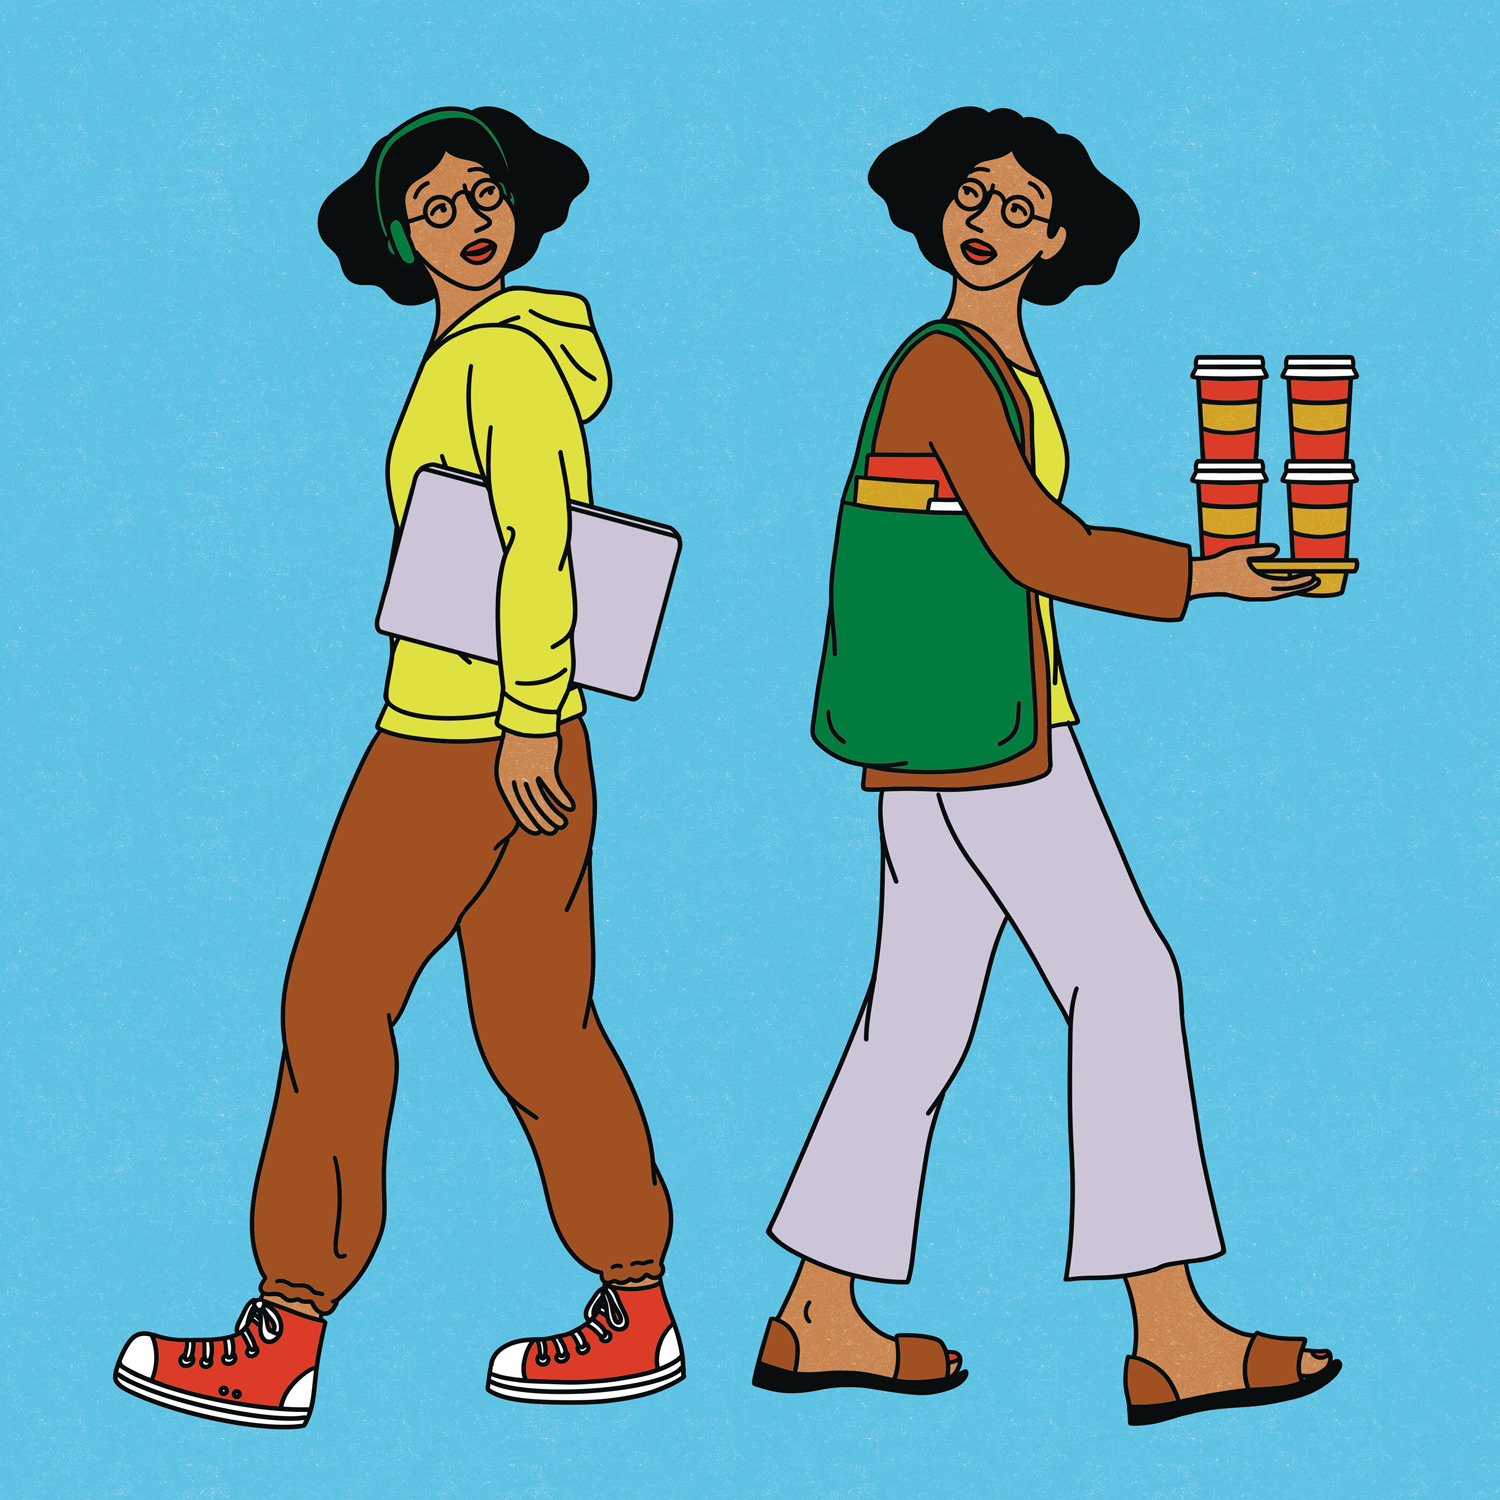 A illustration of two versions of a person, one wears a hoodie, sweats and over-ear headphones and carries a laptop under their arm, depicting the benefits of internships for students. The other version carries a tote bag and a tray of coffees and wears more professional clothing. The two figures walk in opposite directions while looking back at each other over their shoulders.